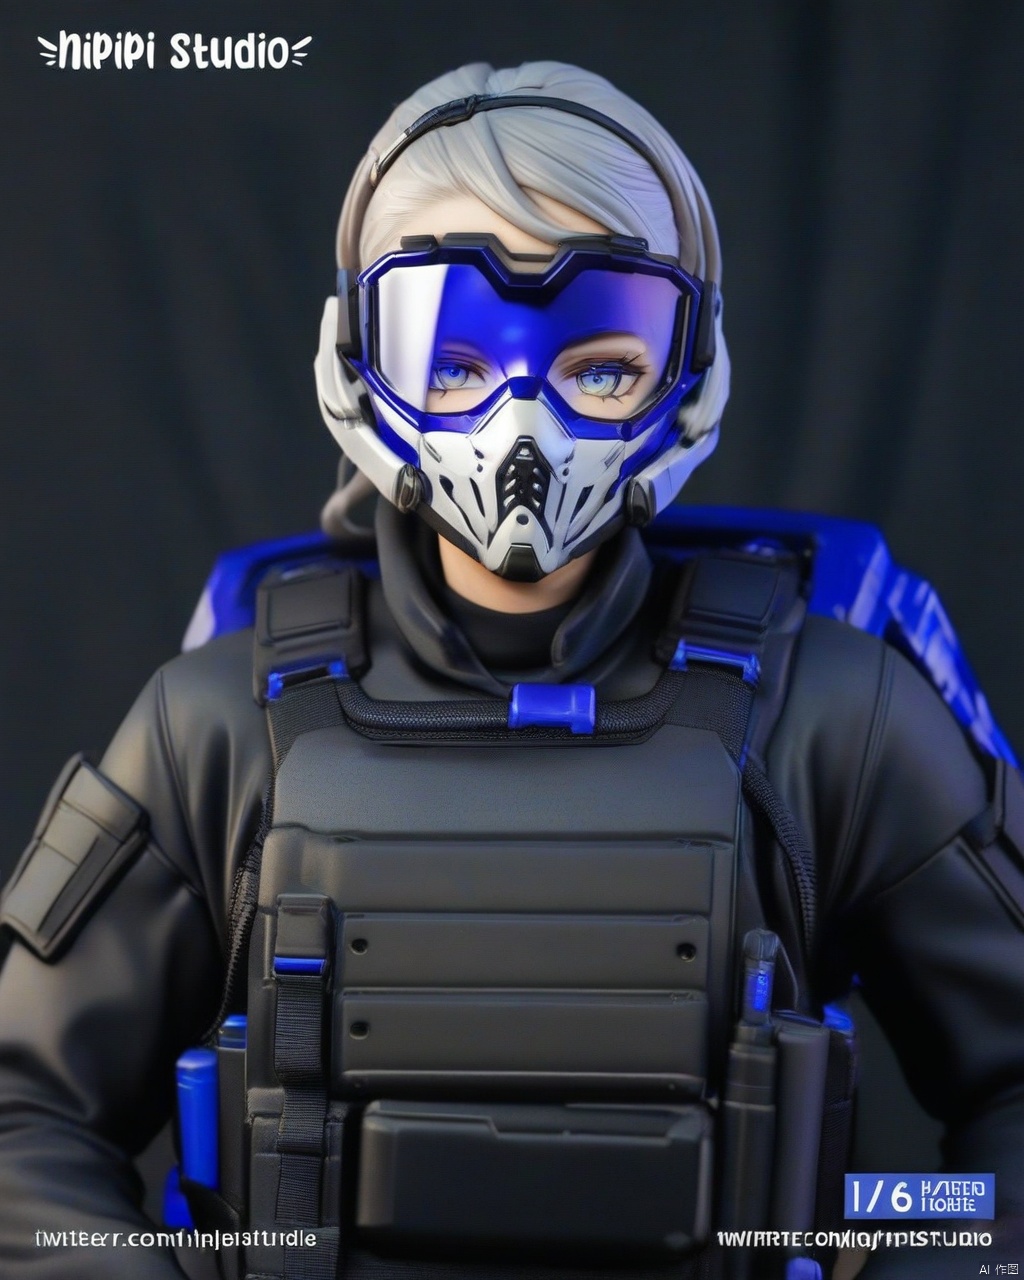 (UHQ, 8k, high resolution), Create a character design for a skilled military operative named Captain Steelhawk, Picture them in a tactical, dark-gray uniform with a concealed face behind a high-tech mask featuring piercing blue eyes